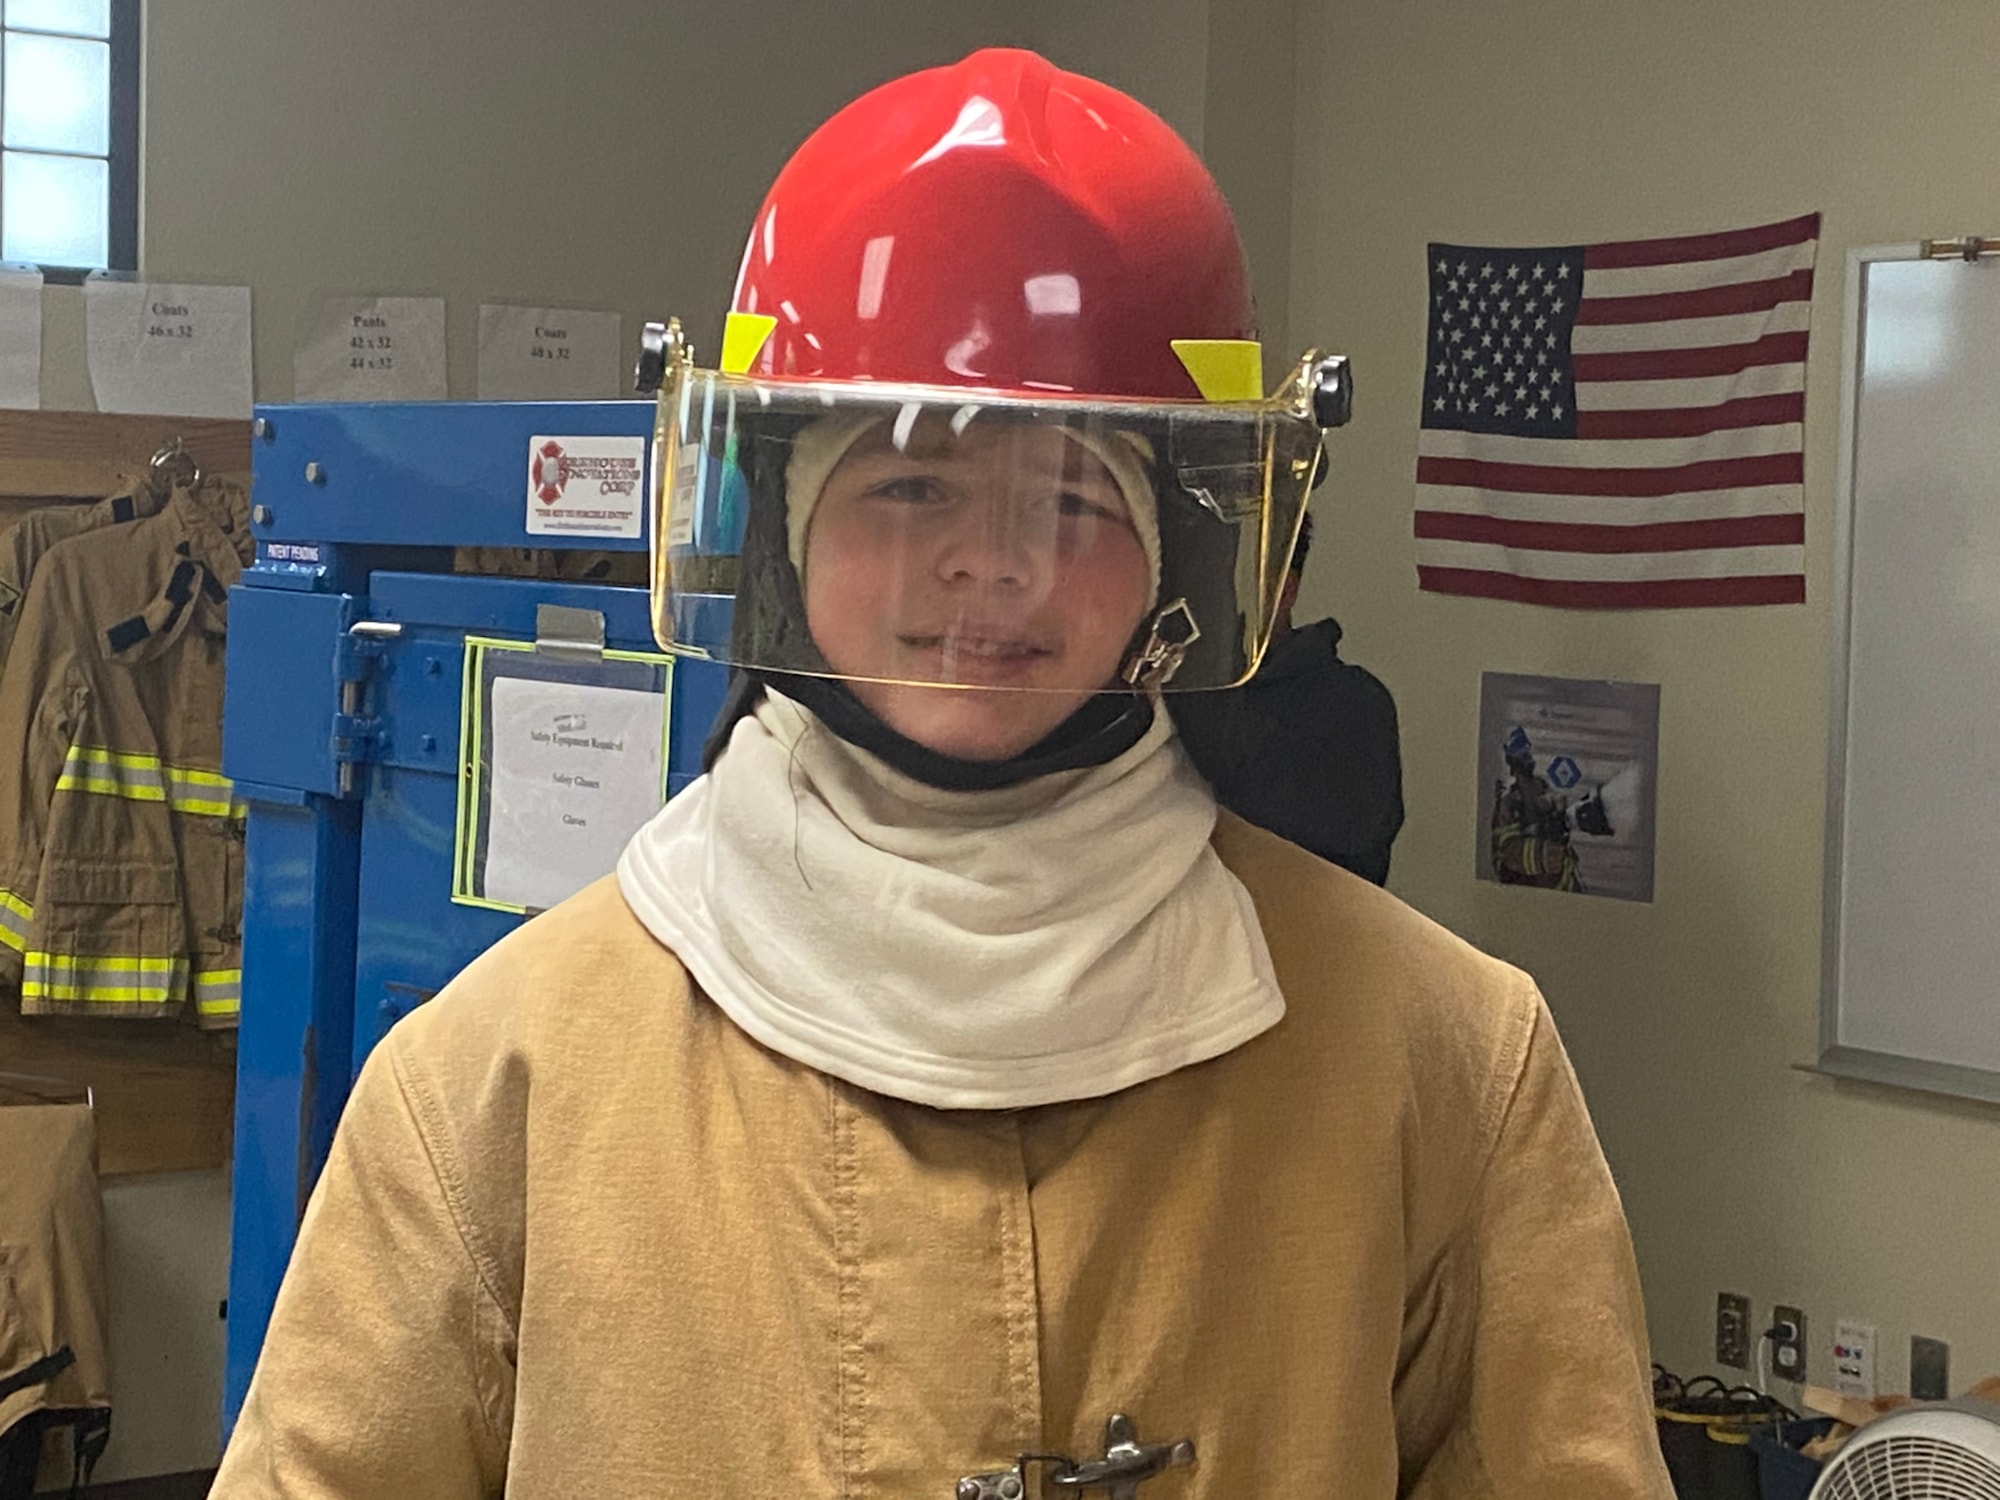 Student poses with Fire gear on